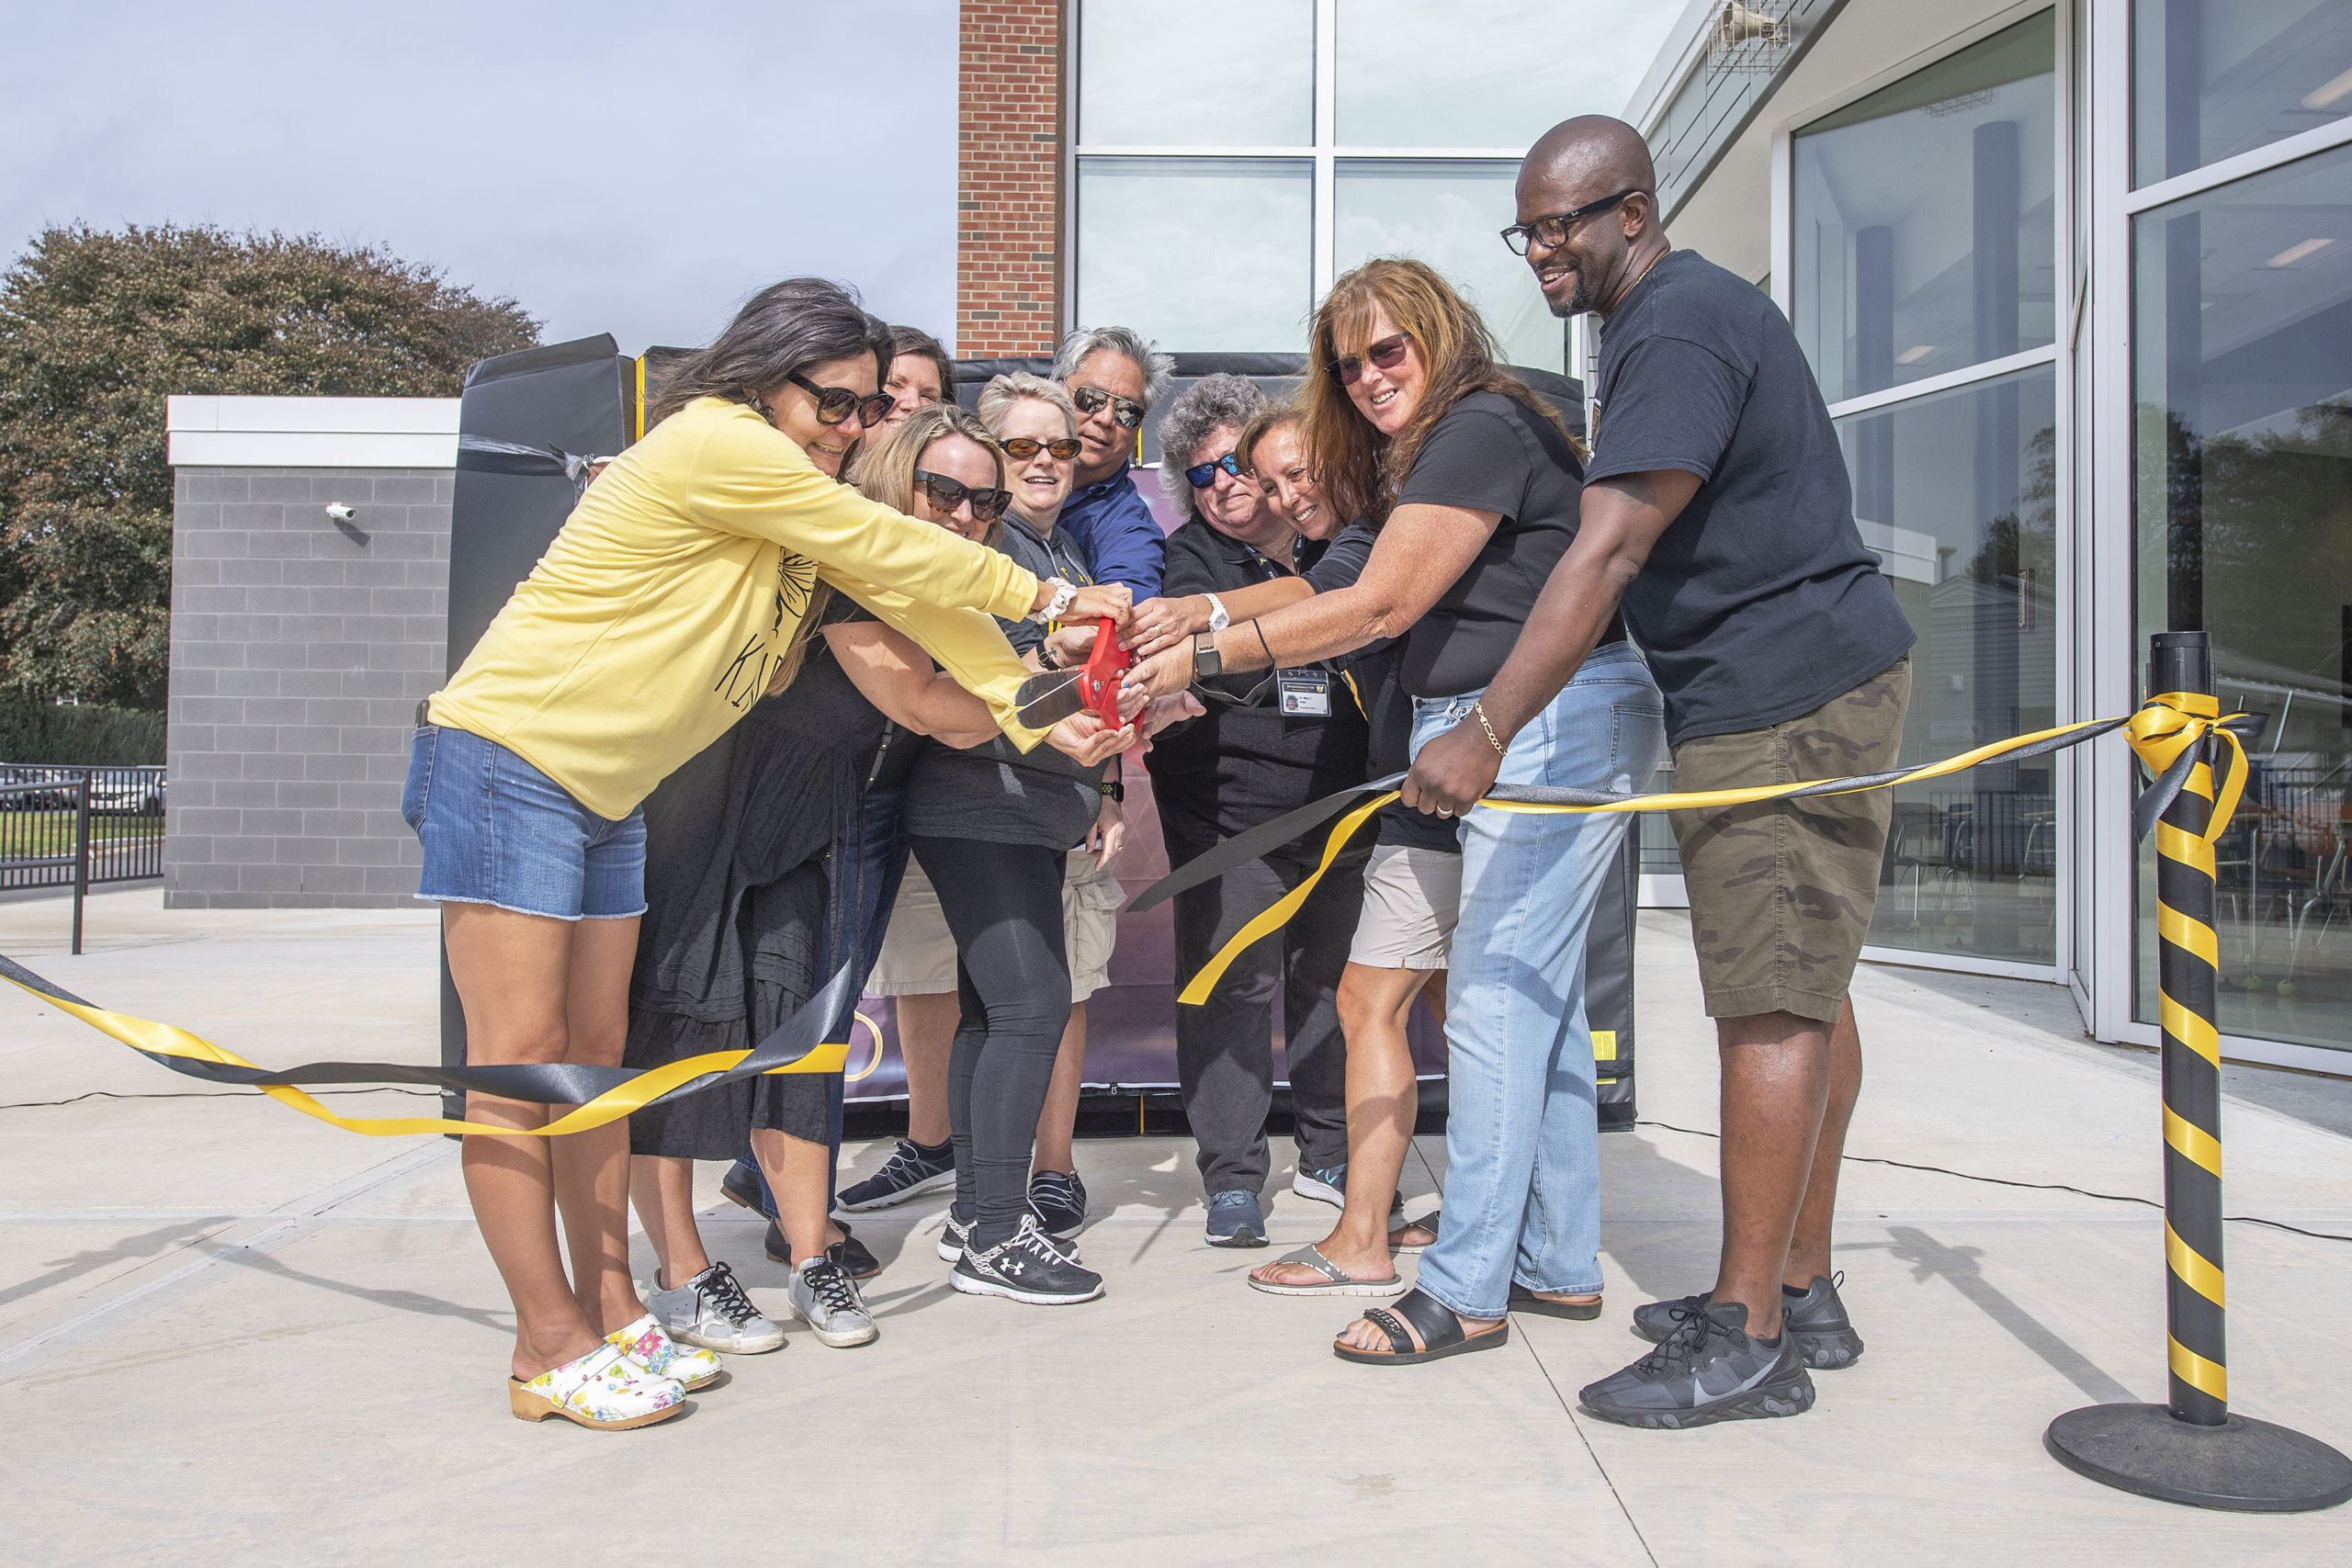 Bridgehampton School Board President Ron White, at far right, is joined by Superintendent Dr. Mary Kelly and other board members as they cut the ribbon to officially open the new addition to the Bridgehampton School during the first annual Bridgehampton Community Day that was held behind the Bridgehampton School on Saturday.   MICHAEL HELLER